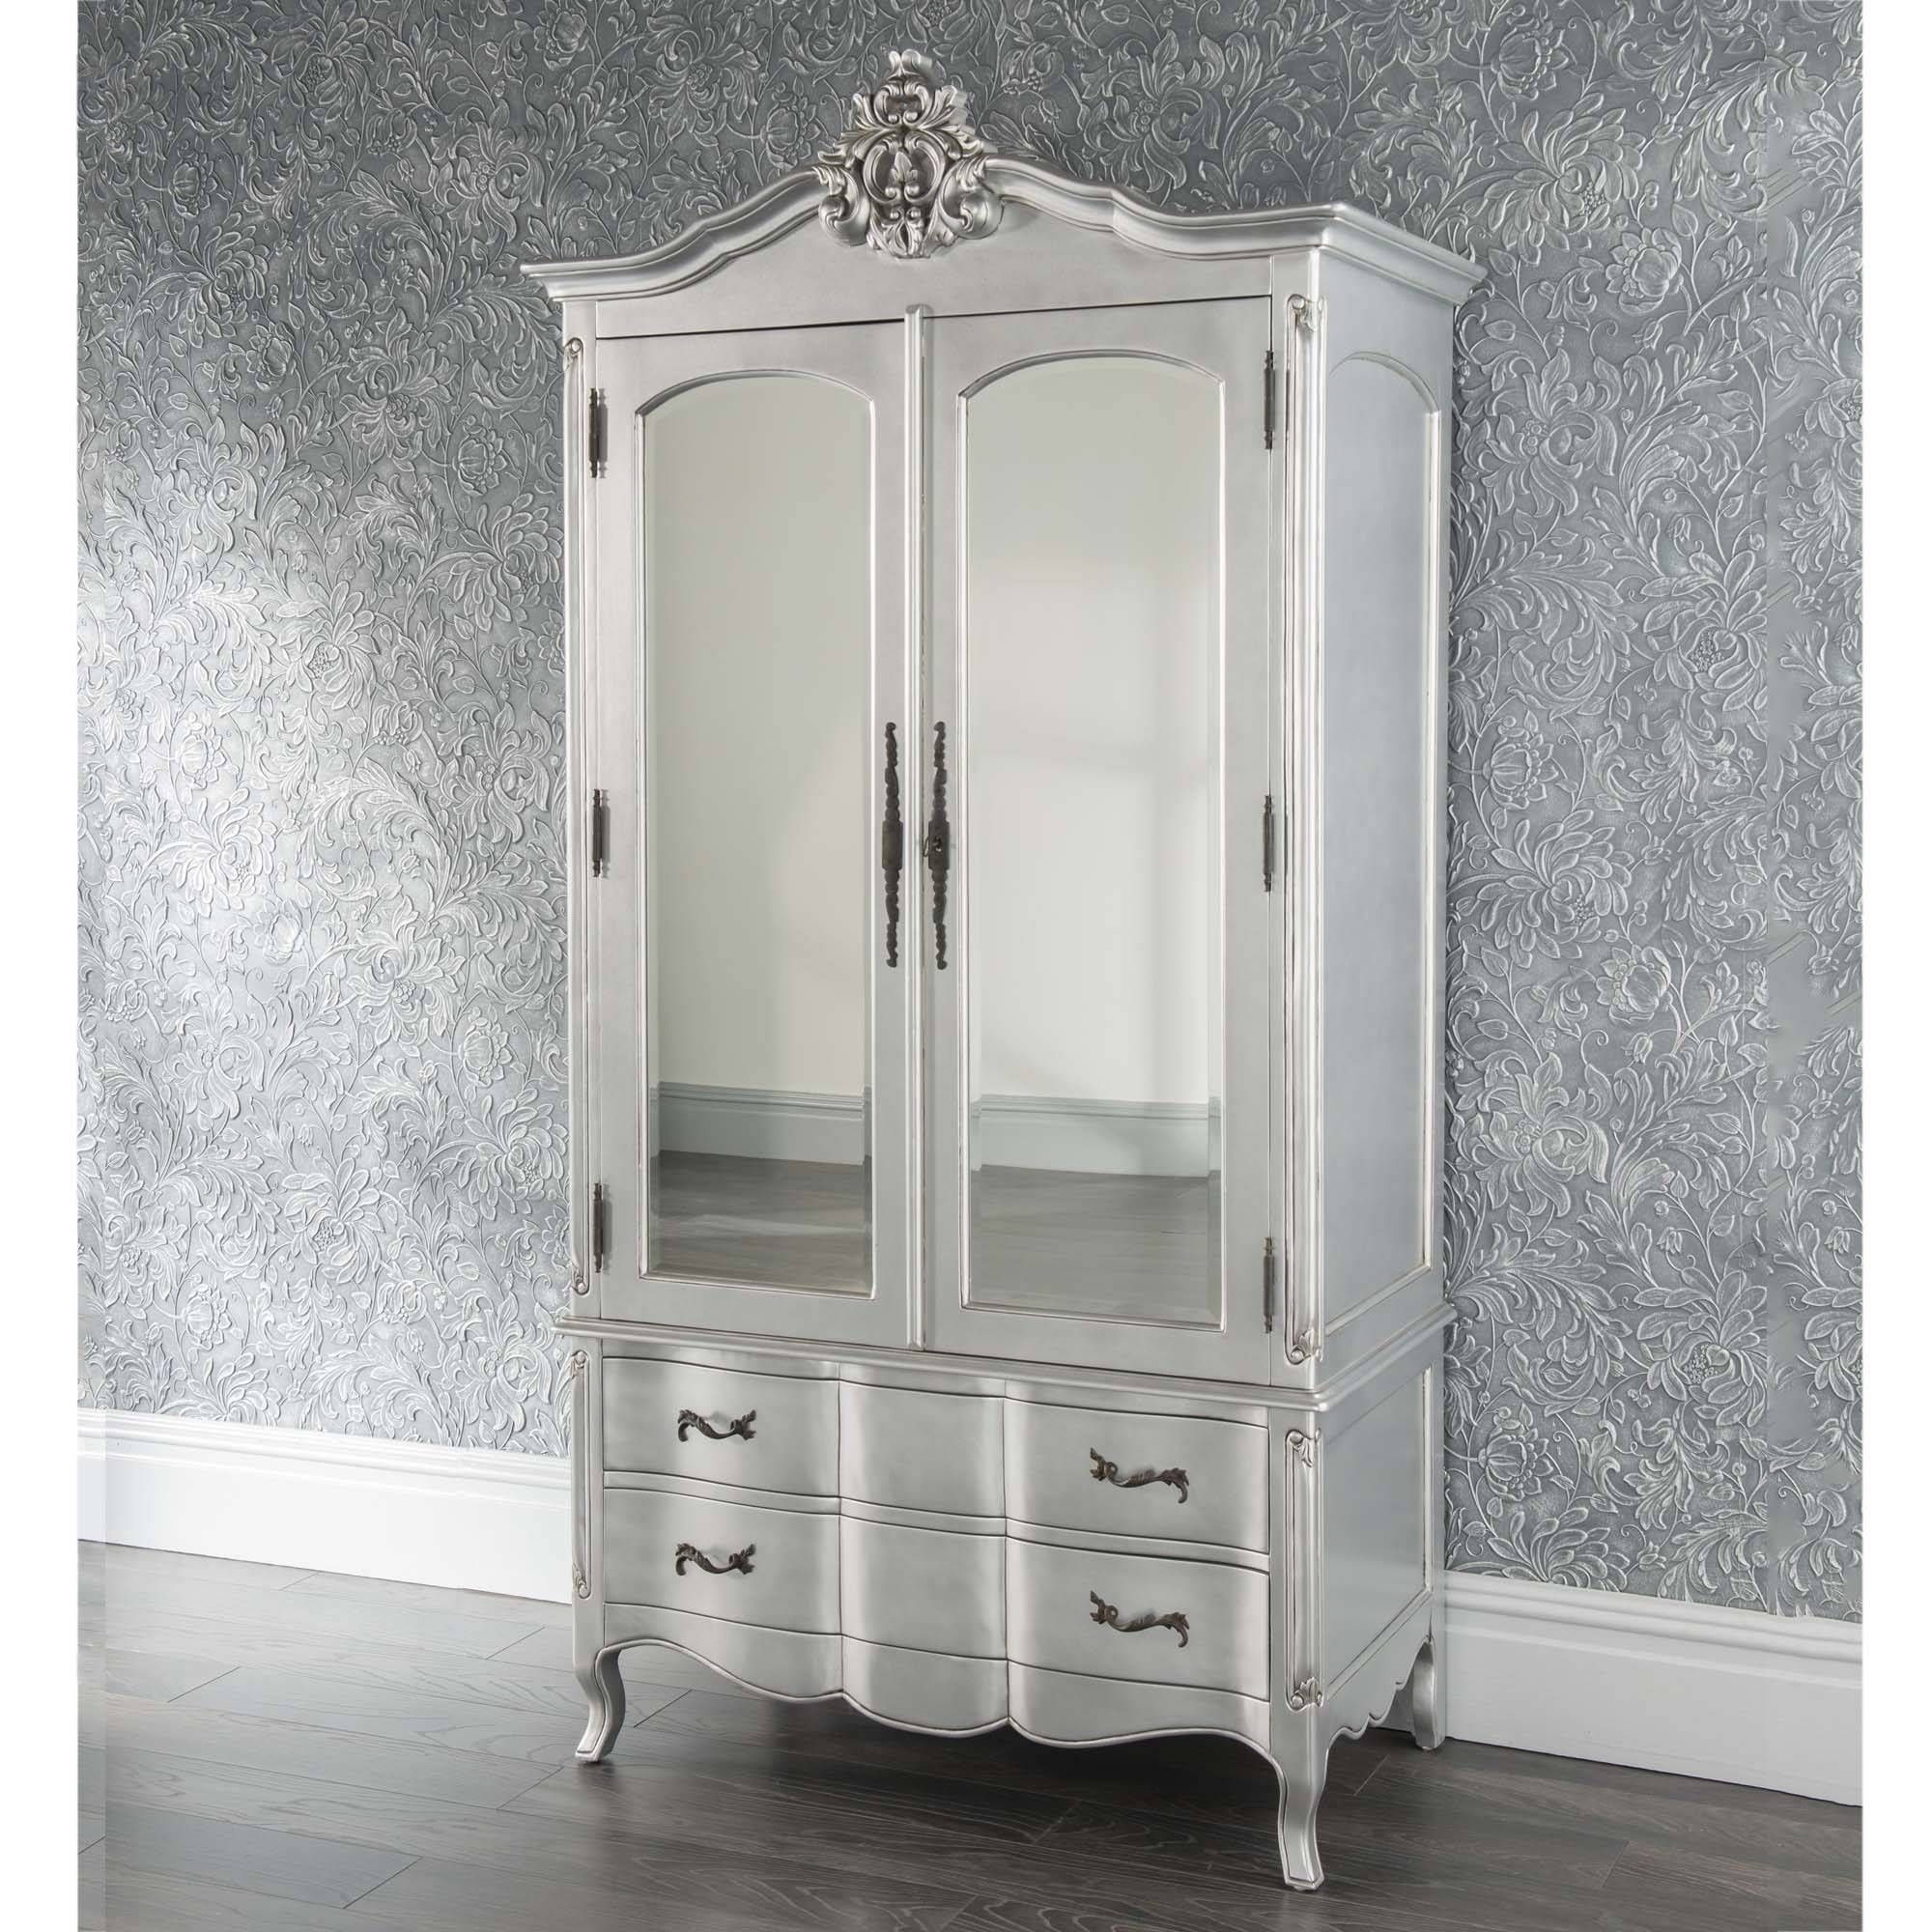 Estelle Antique French Style Wardrobe | Shabby Chic Regarding Antique Style Wardrobes (View 4 of 15)